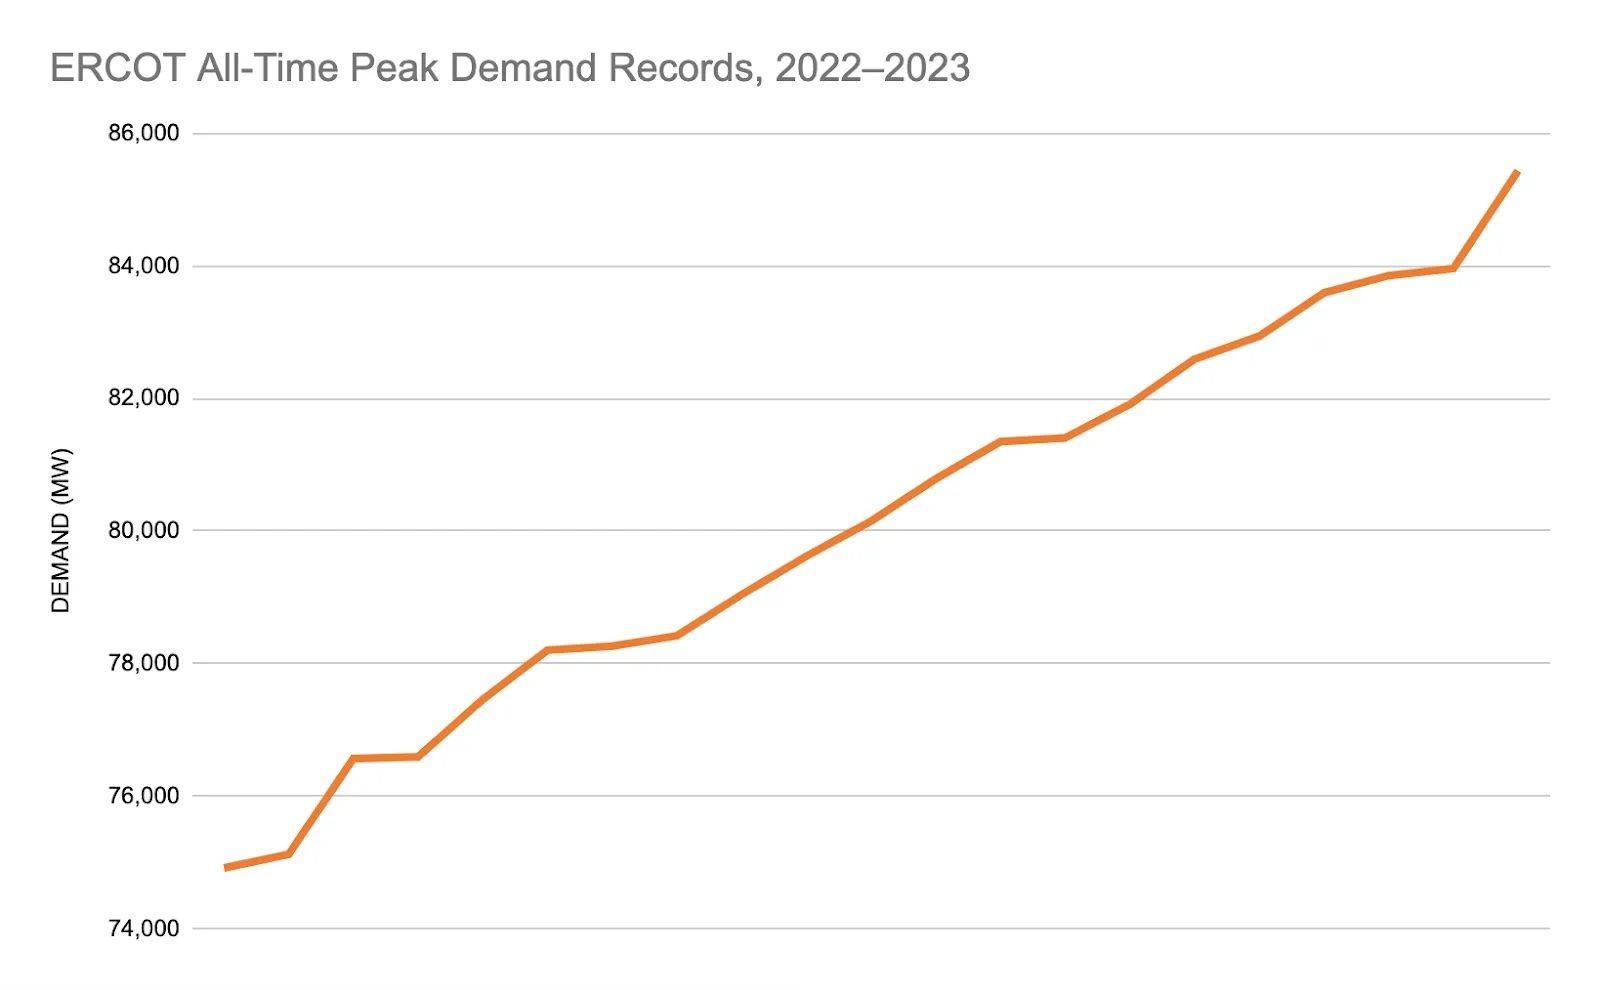 ERCOT All-Time Peak Demand Records, 2022-2023